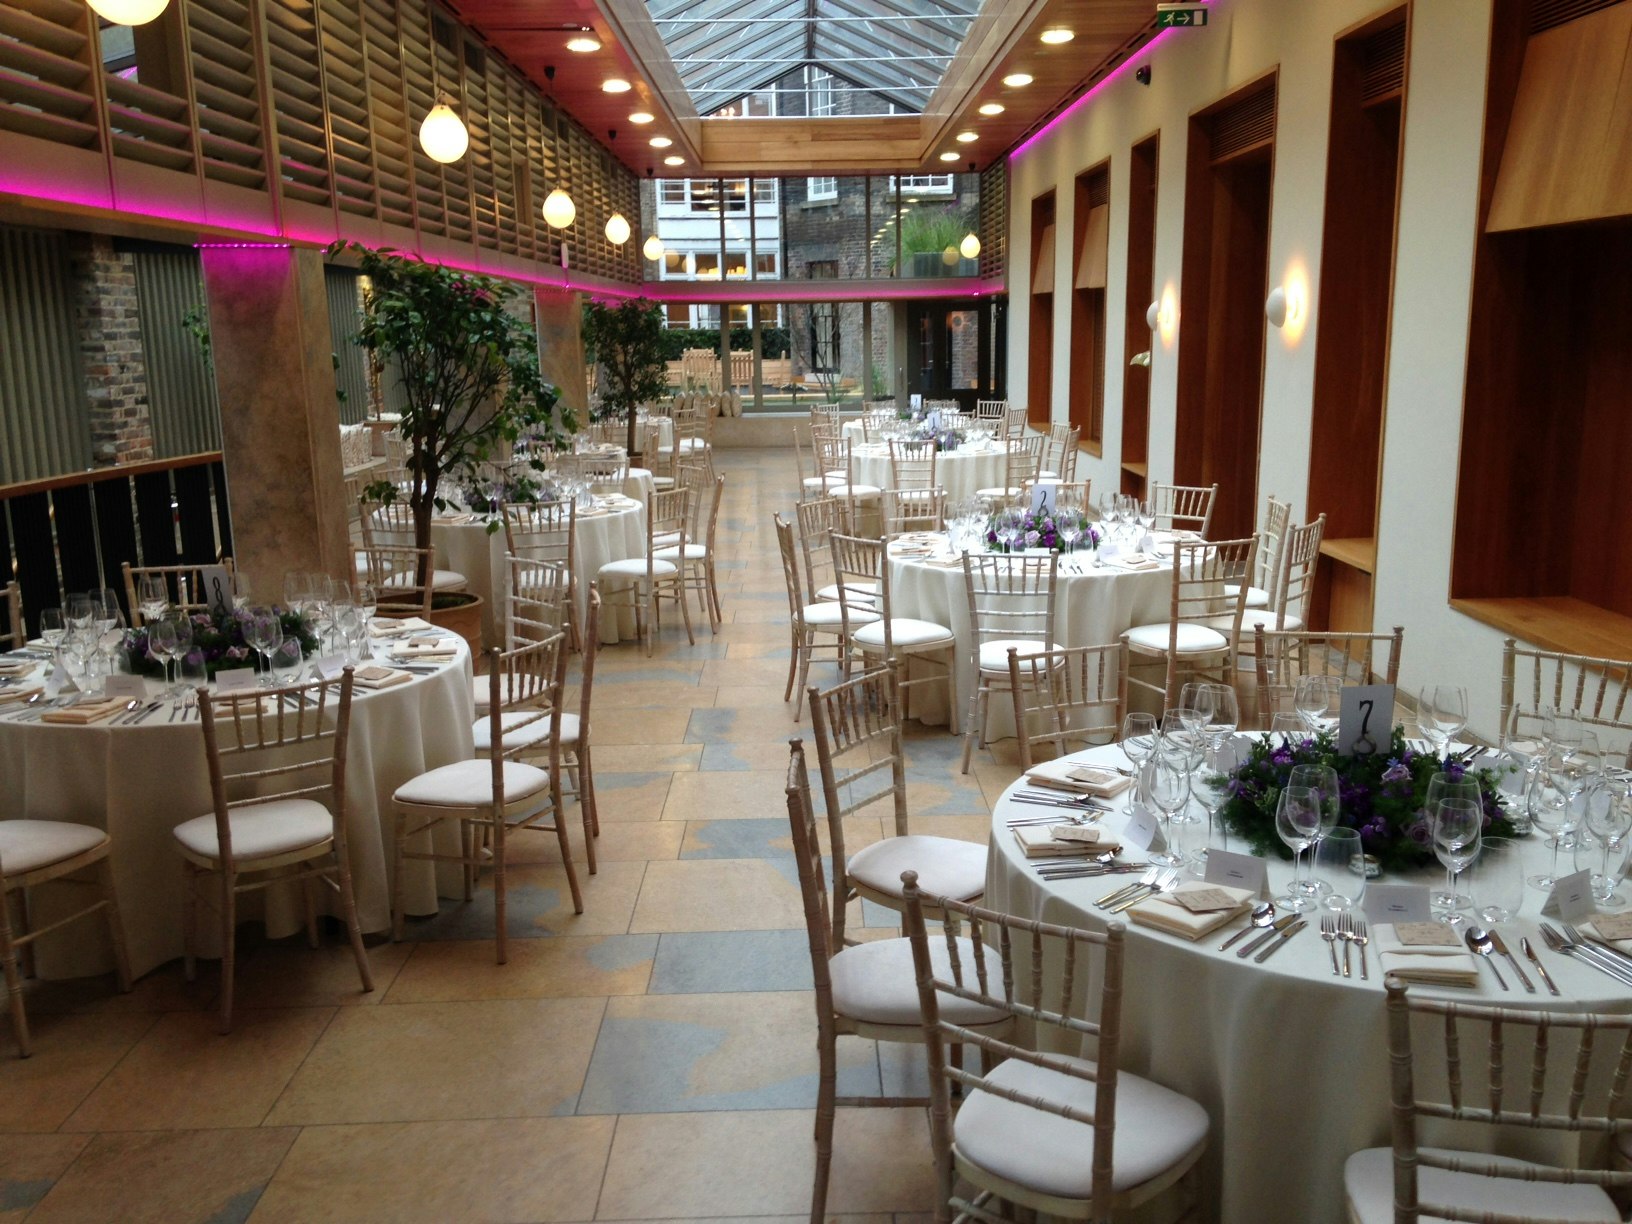 Private Dining Rooms Venues in East London - No.11 Cavendish Square